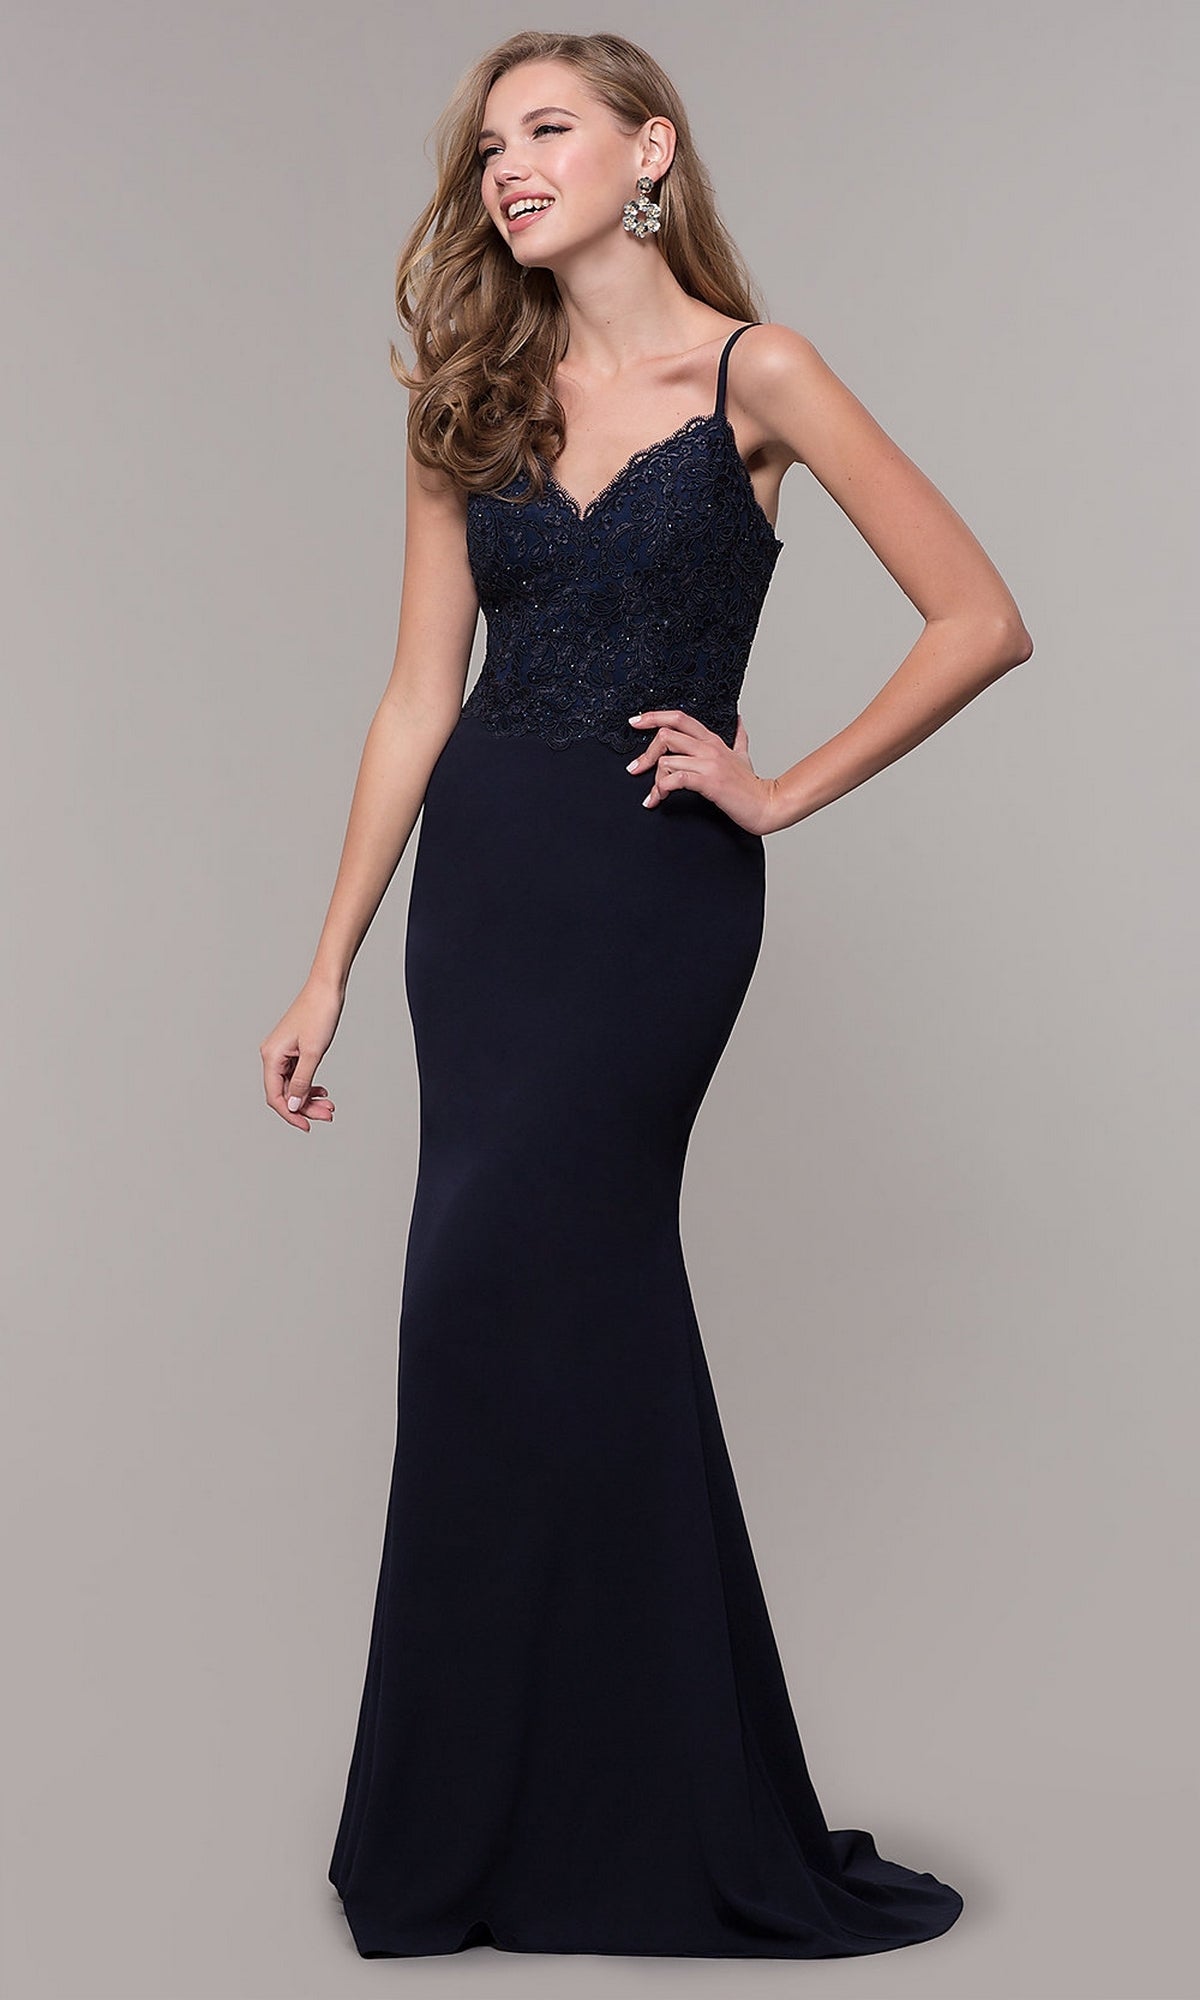 Long Formal Prom Dress with Embroidered Bodice